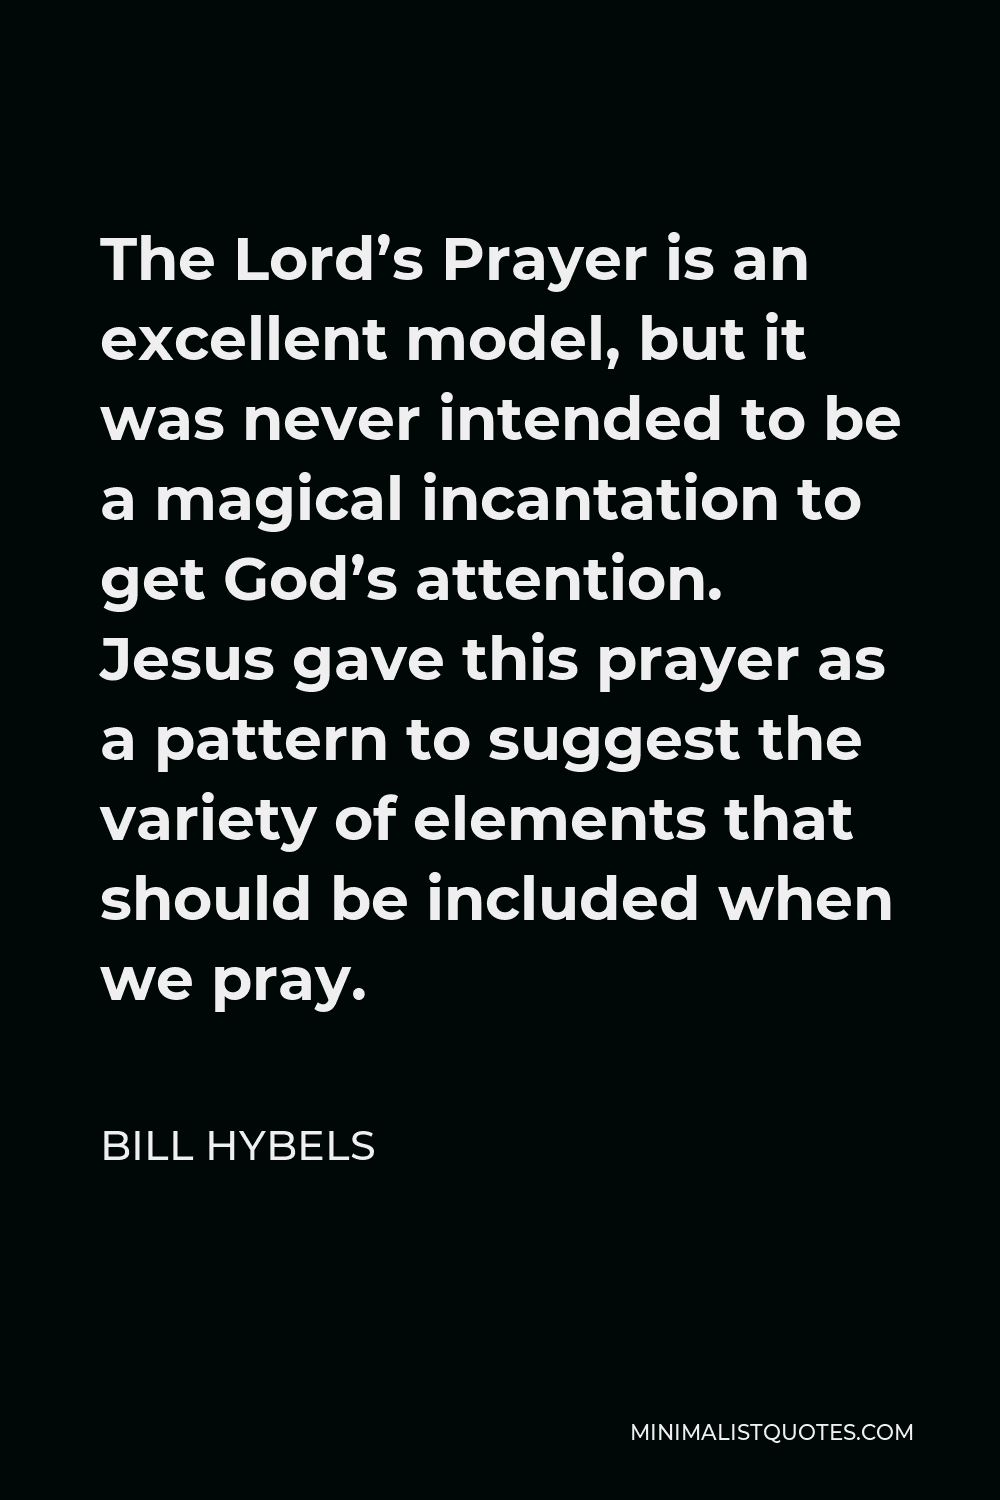 Bill Hybels Quote - The Lord’s Prayer is an excellent model, but it was never intended to be a magical incantation to get God’s attention. Jesus gave this prayer as a pattern to suggest the variety of elements that should be included when we pray.